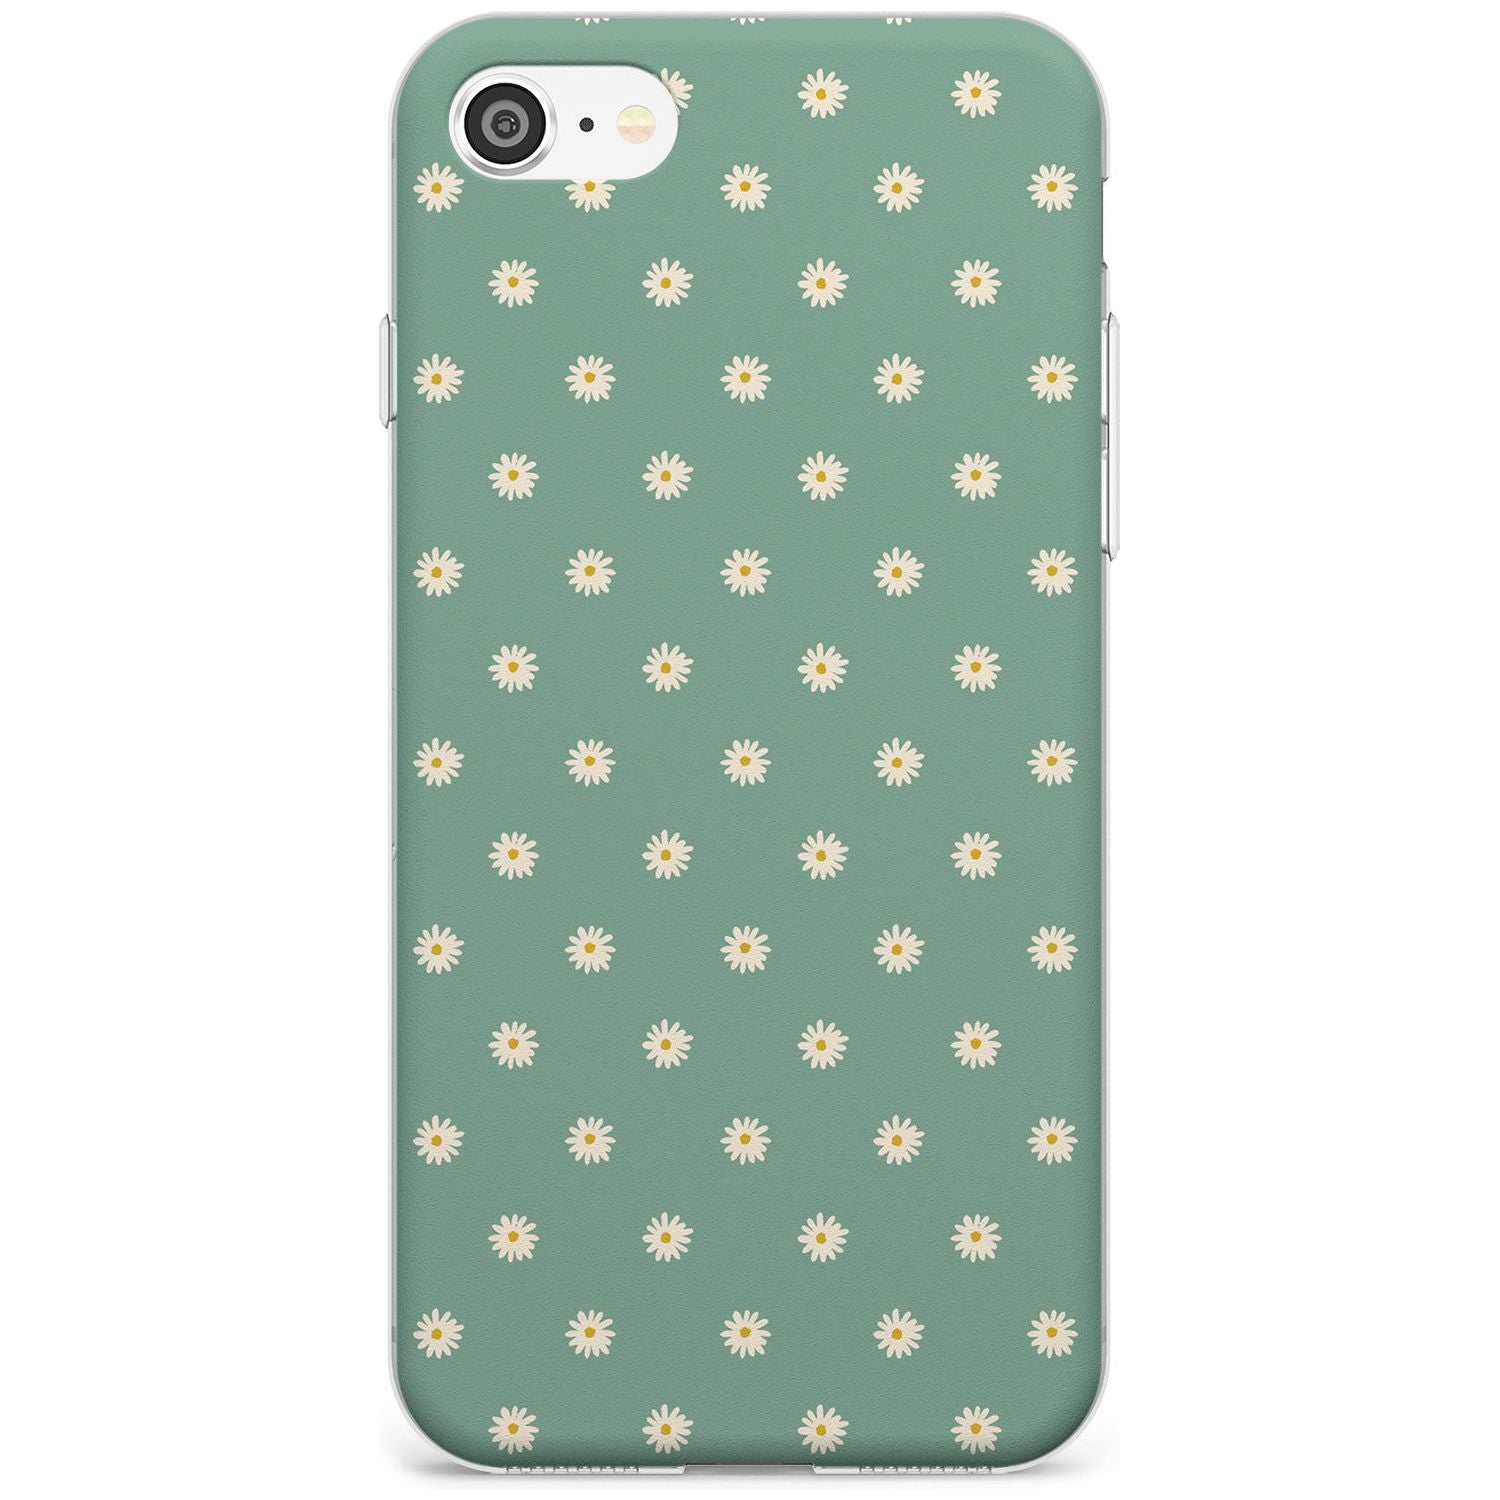 Daisy Pattern - Teal Cute Floral Daisy Design Black Impact Phone Case for iPhone SE 8 7 Plus